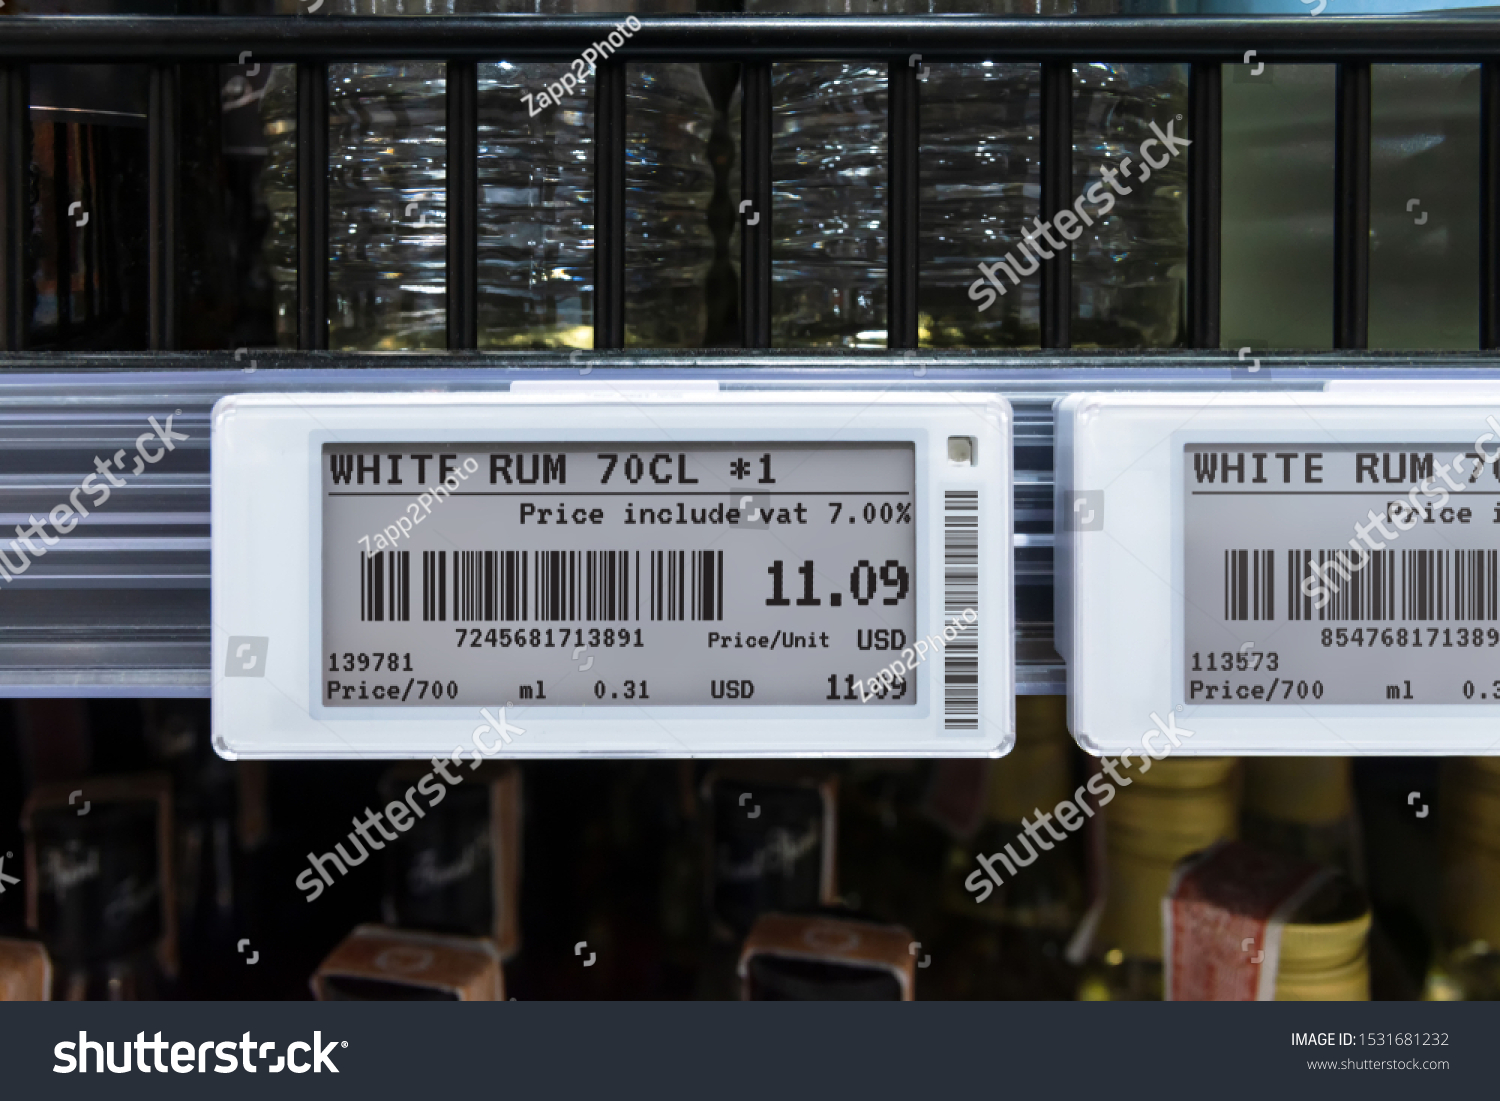 Smart retail digital store technology concept.Electronic Shelf Label(ESL) led for automatically updated displaying product pricing on shelves for retail business. Price is change from control service. #1531681232